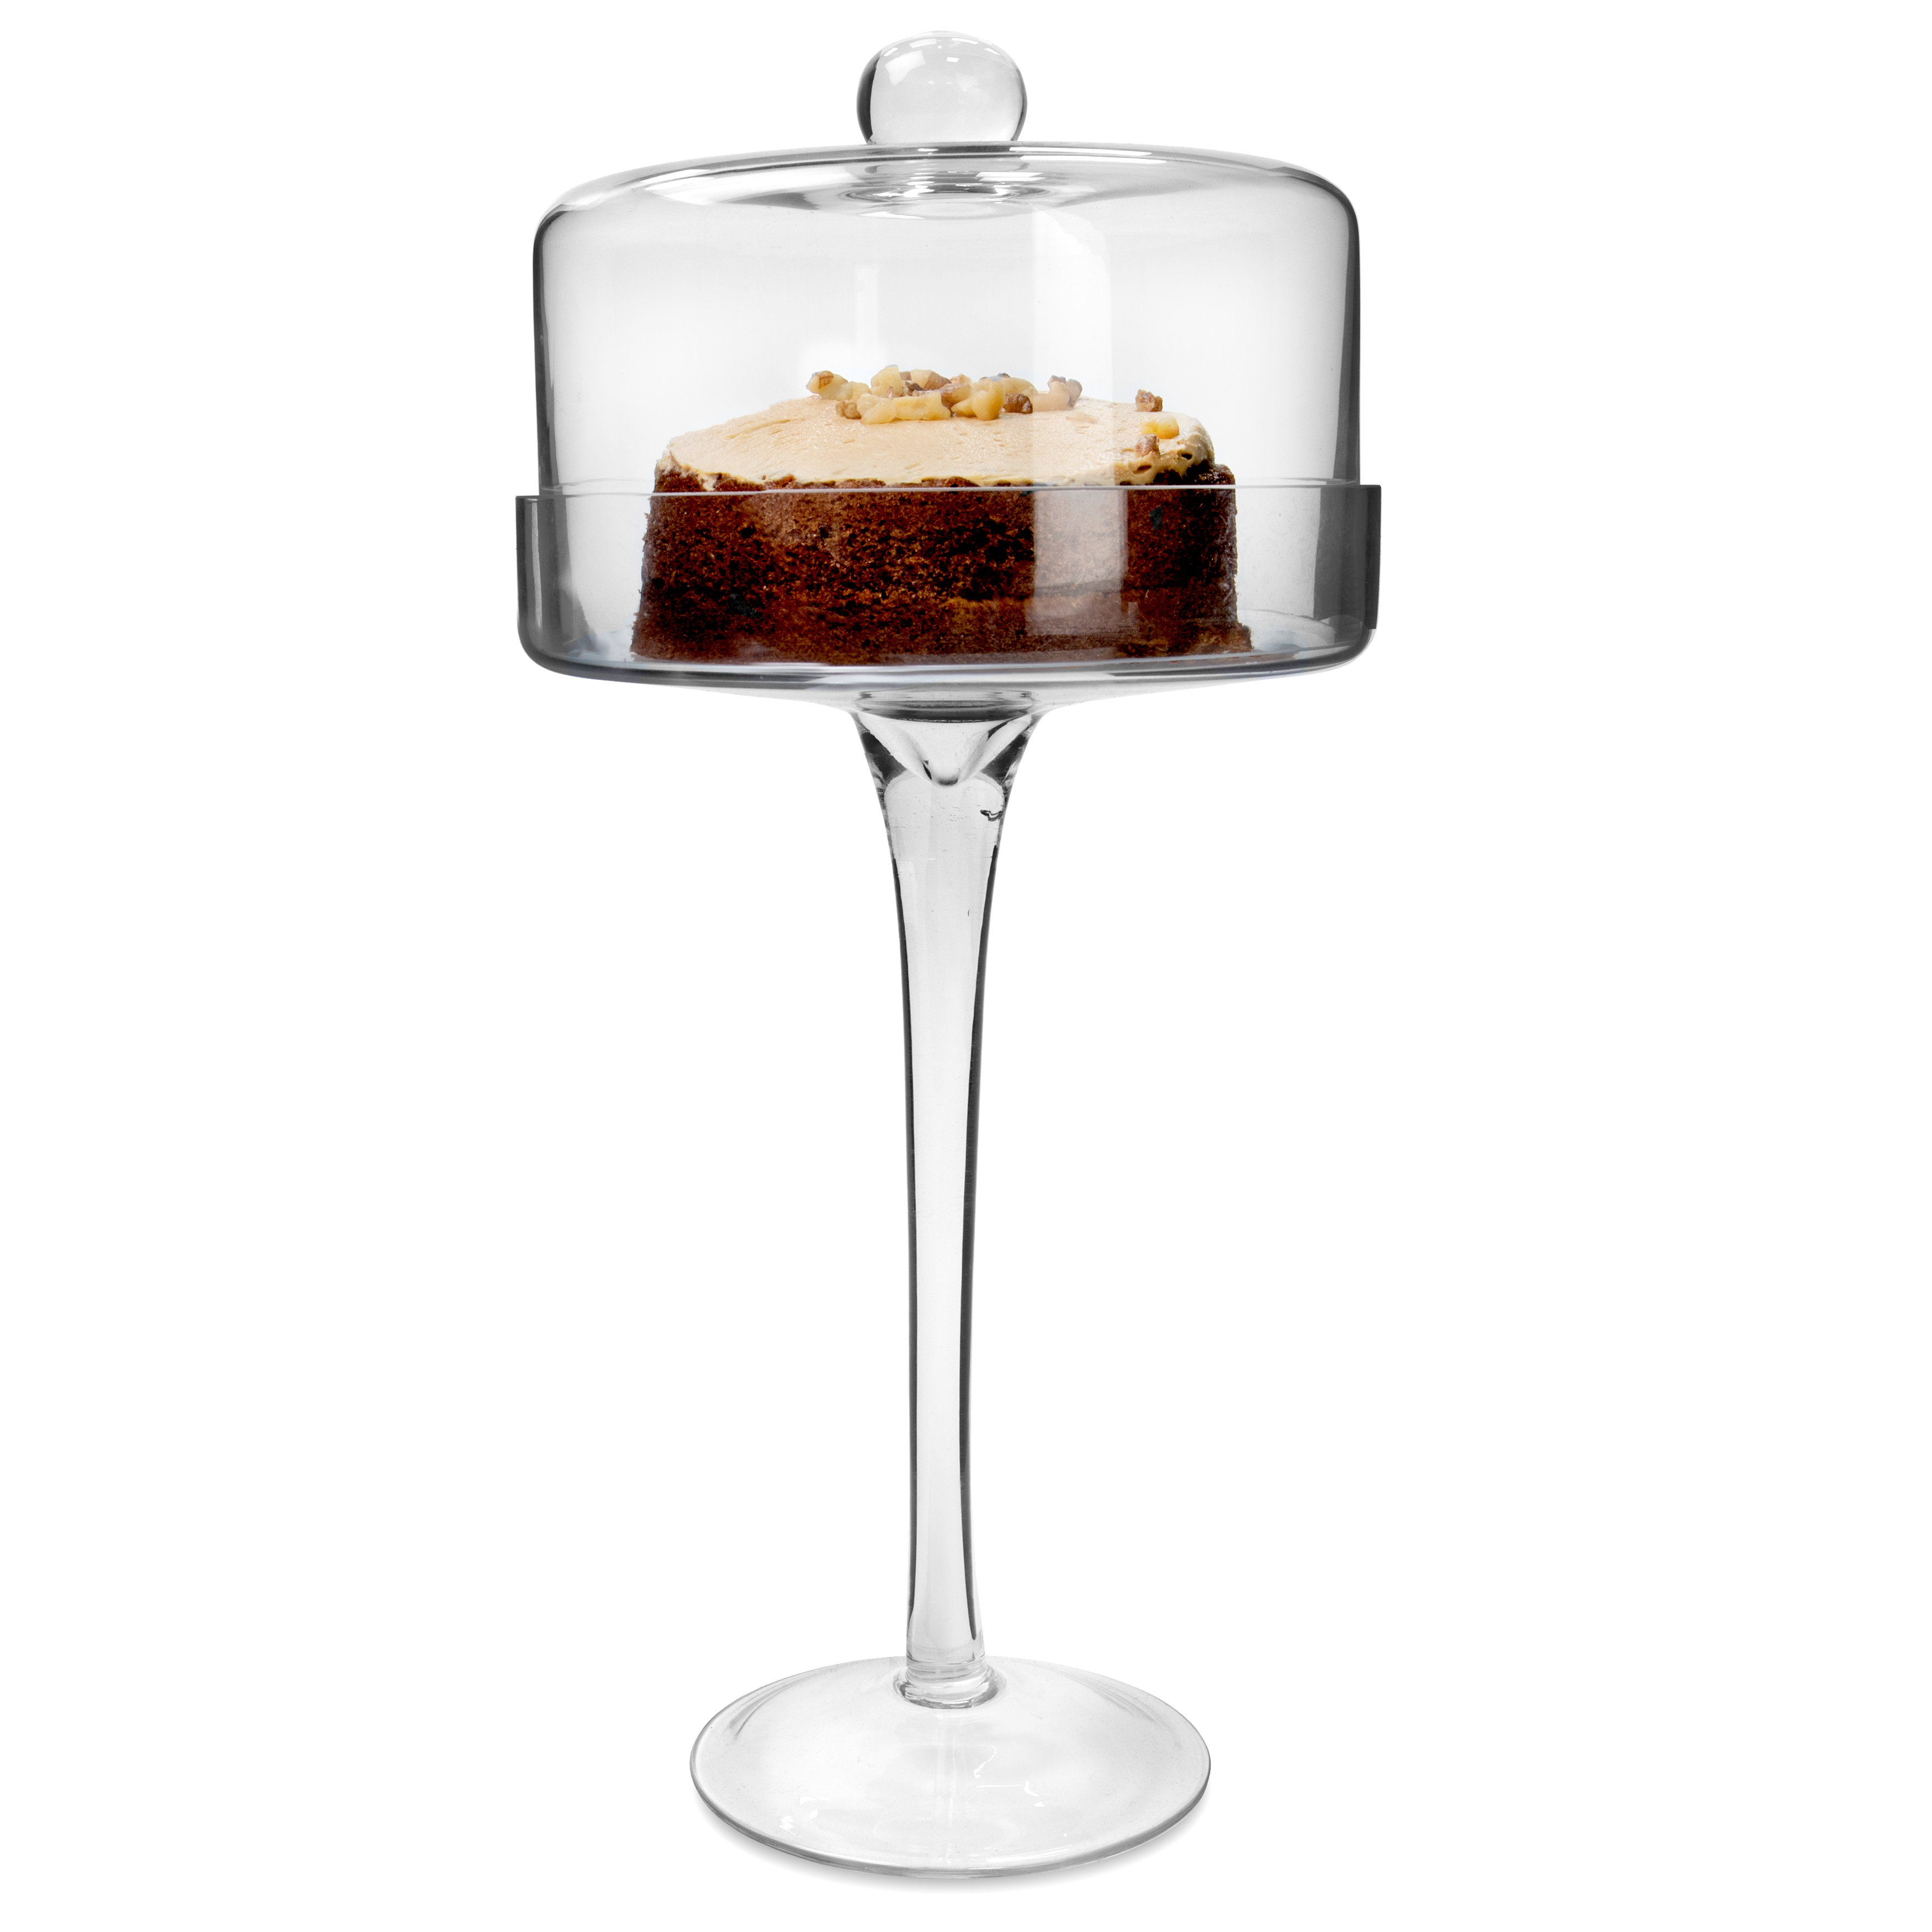 Glass Cake Stand With Cover Savings | clc.cet.edu